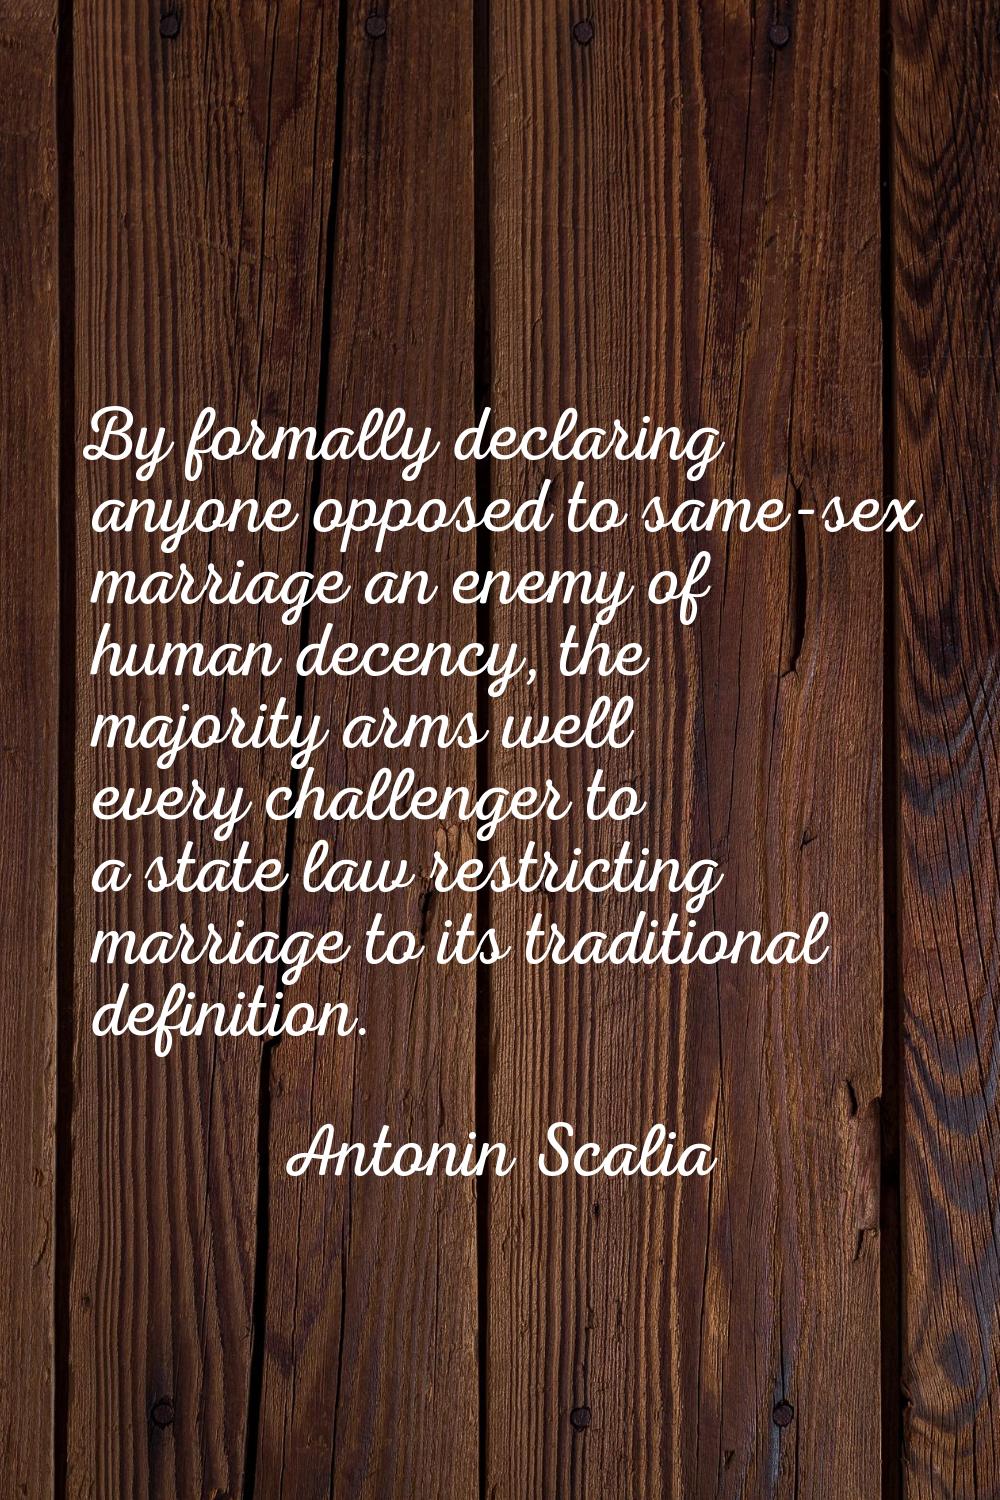 By formally declaring anyone opposed to same-sex marriage an enemy of human decency, the majority a